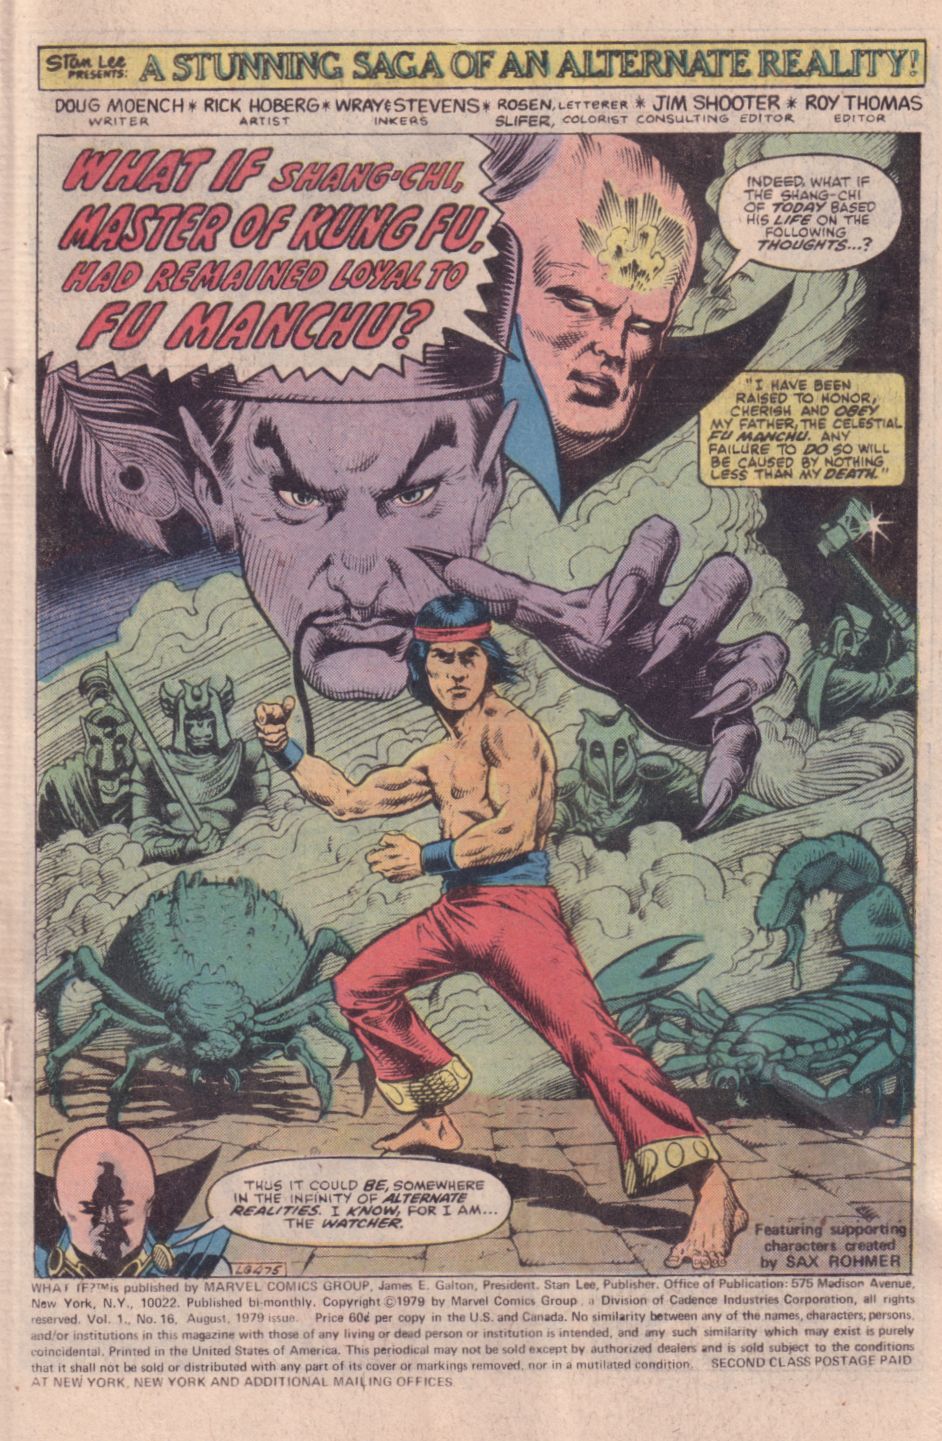 What If? (1977) Issue #16 - Shang Chi Master of Kung Fu fought on The side of Fu Manchu #16 - English 2